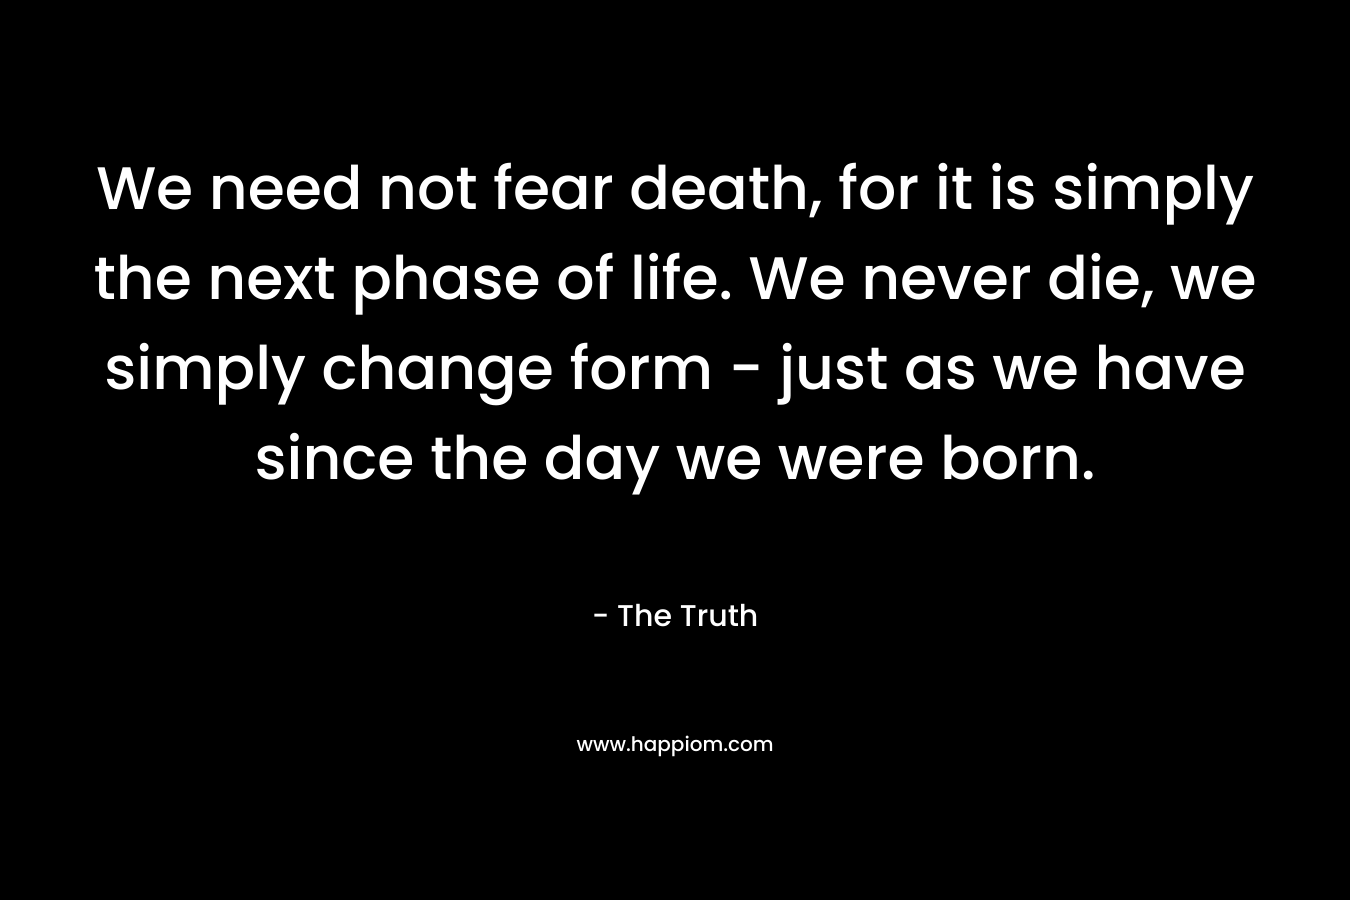 We need not fear death, for it is simply the next phase of life. We never die, we simply change form - just as we have since the day we were born.